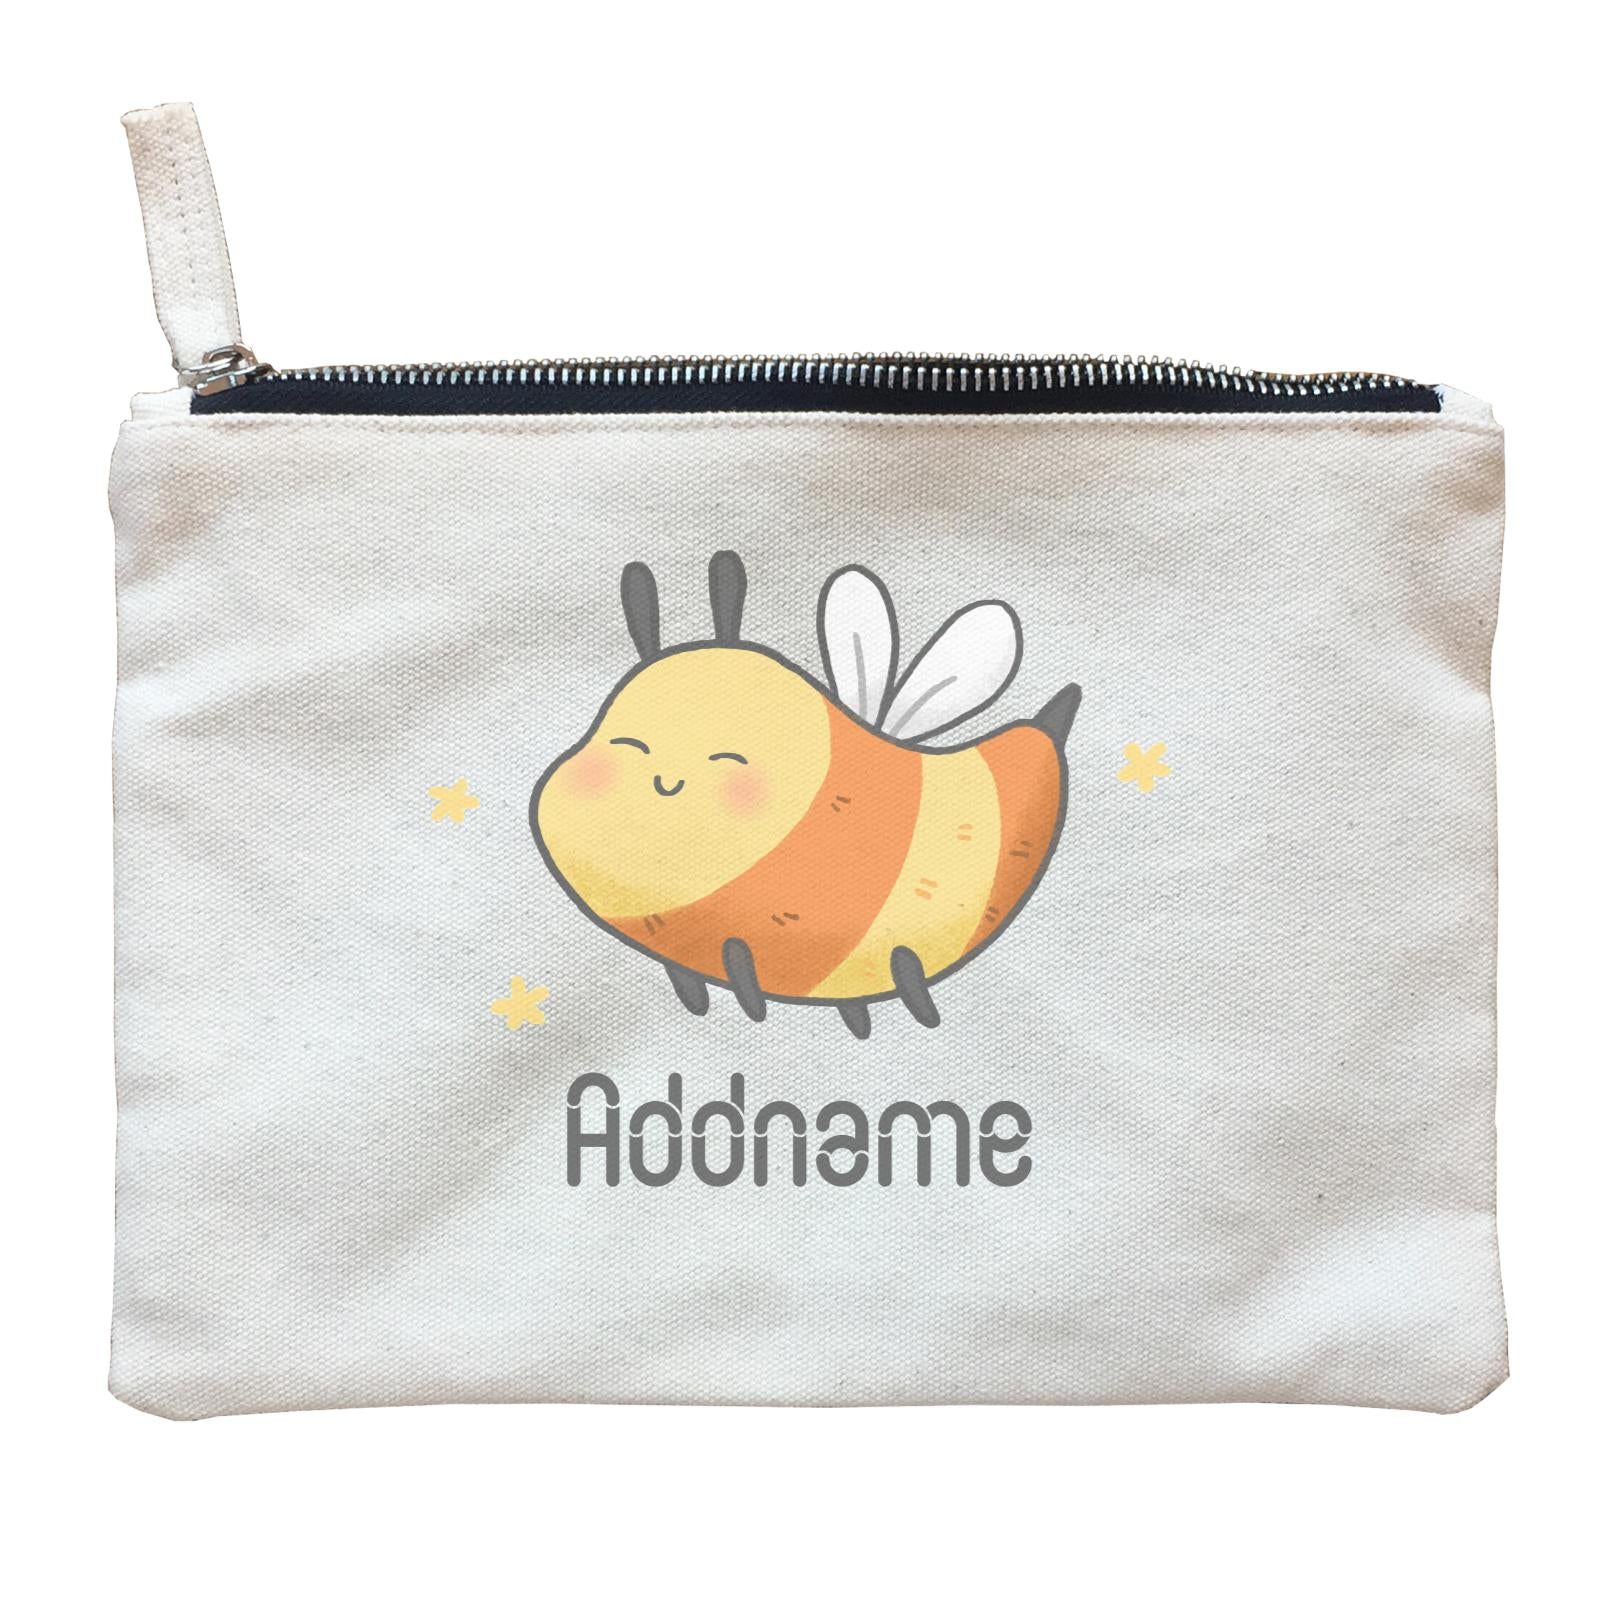 Cute Hand Drawn Style Bee Addname Zipper Pouch